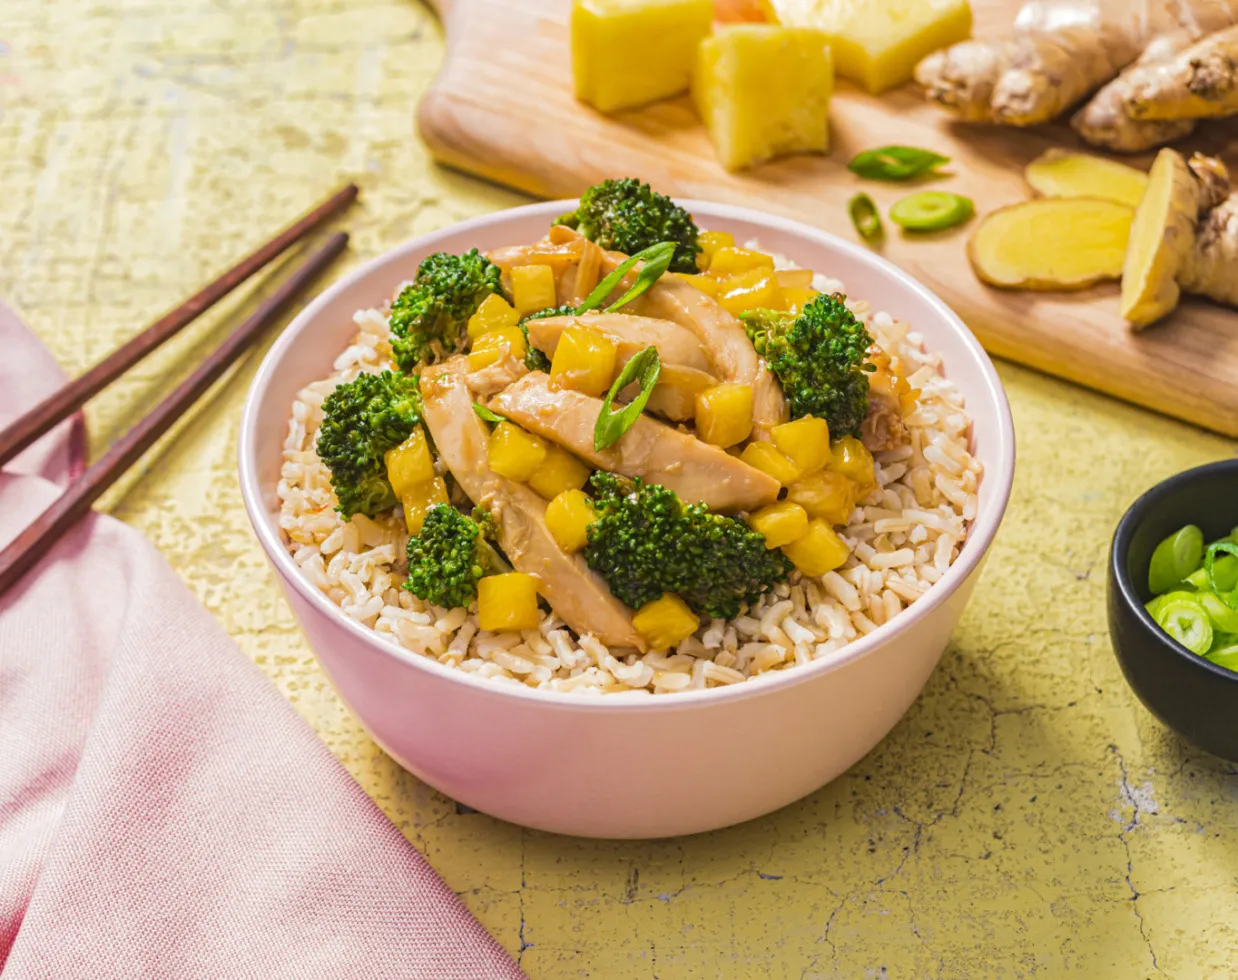 15 Minute Chicken, Broccoli and Pineapple Stir-Fry